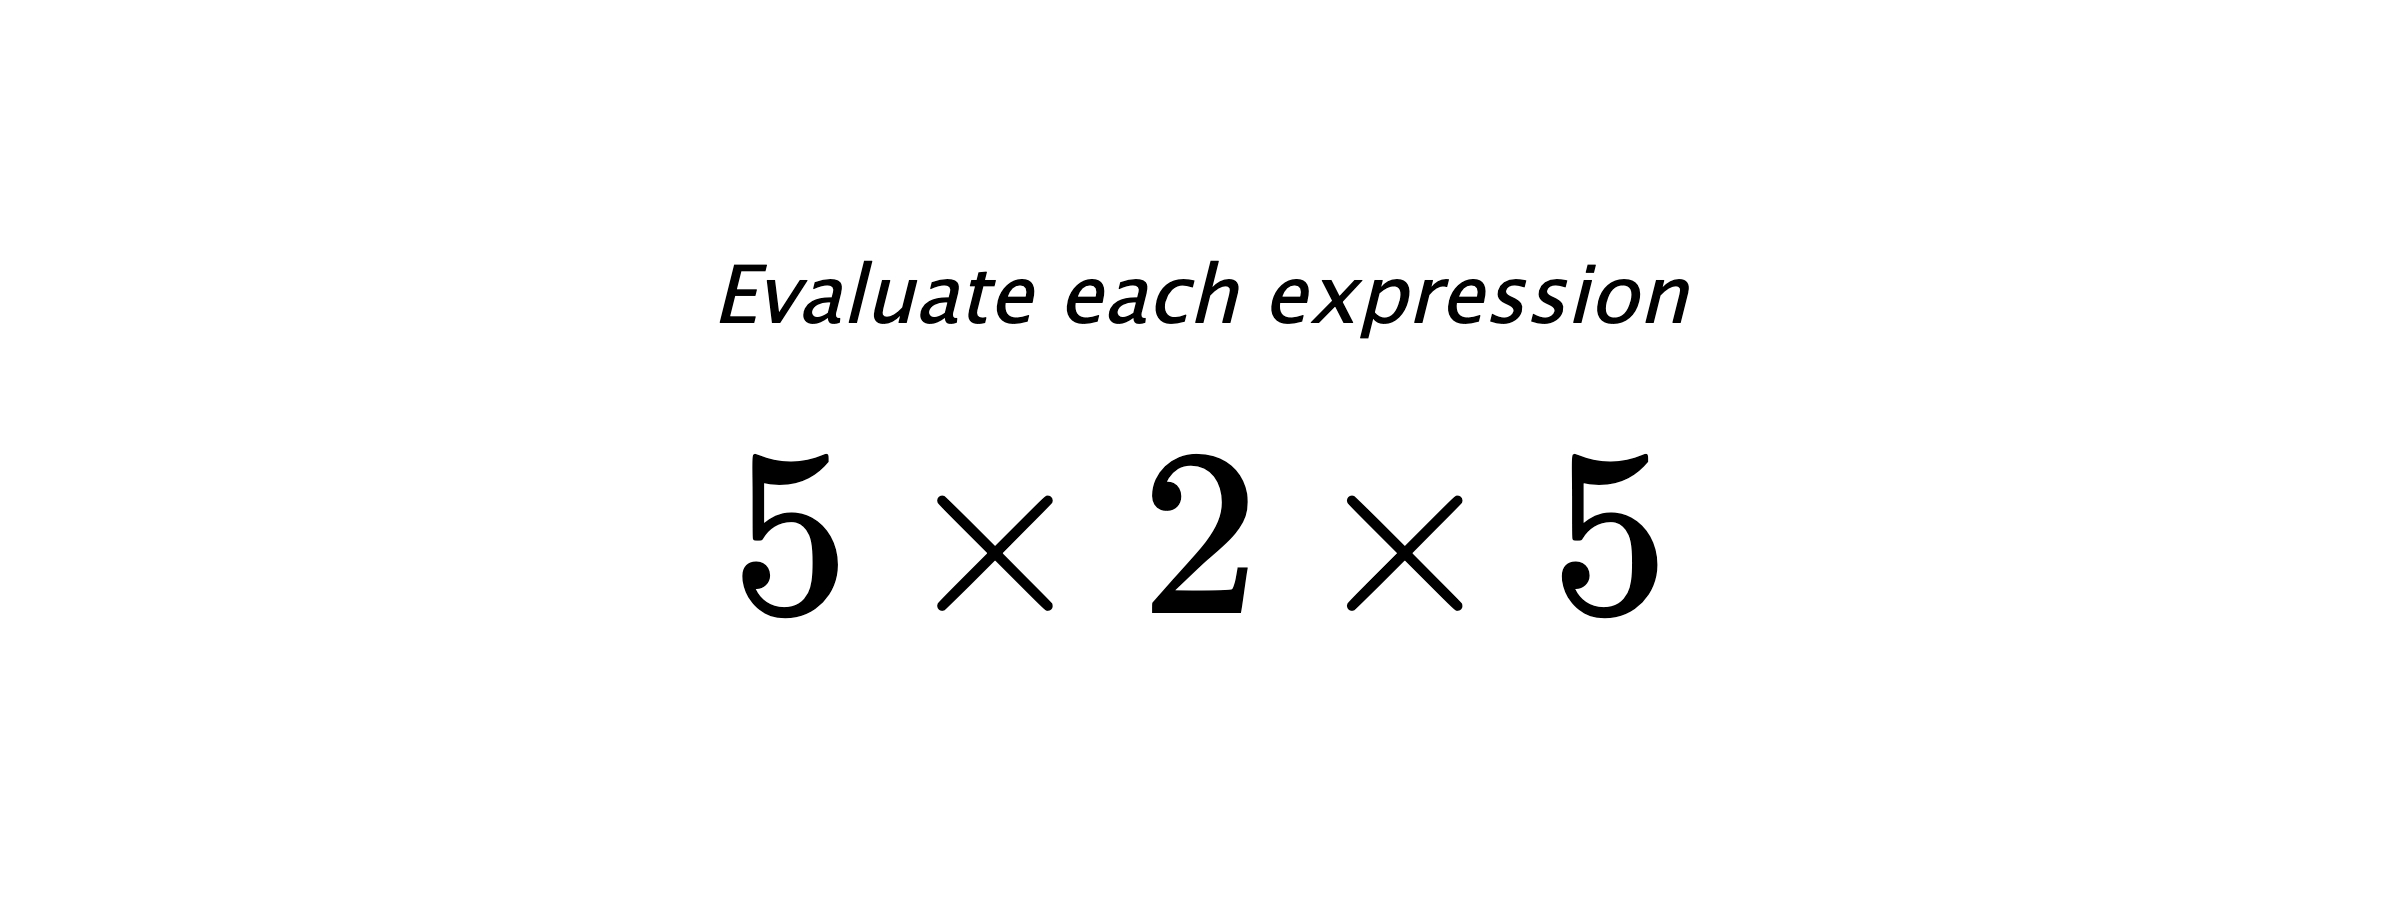 Evaluate each expression $ 5 \times 2 \times 5 $